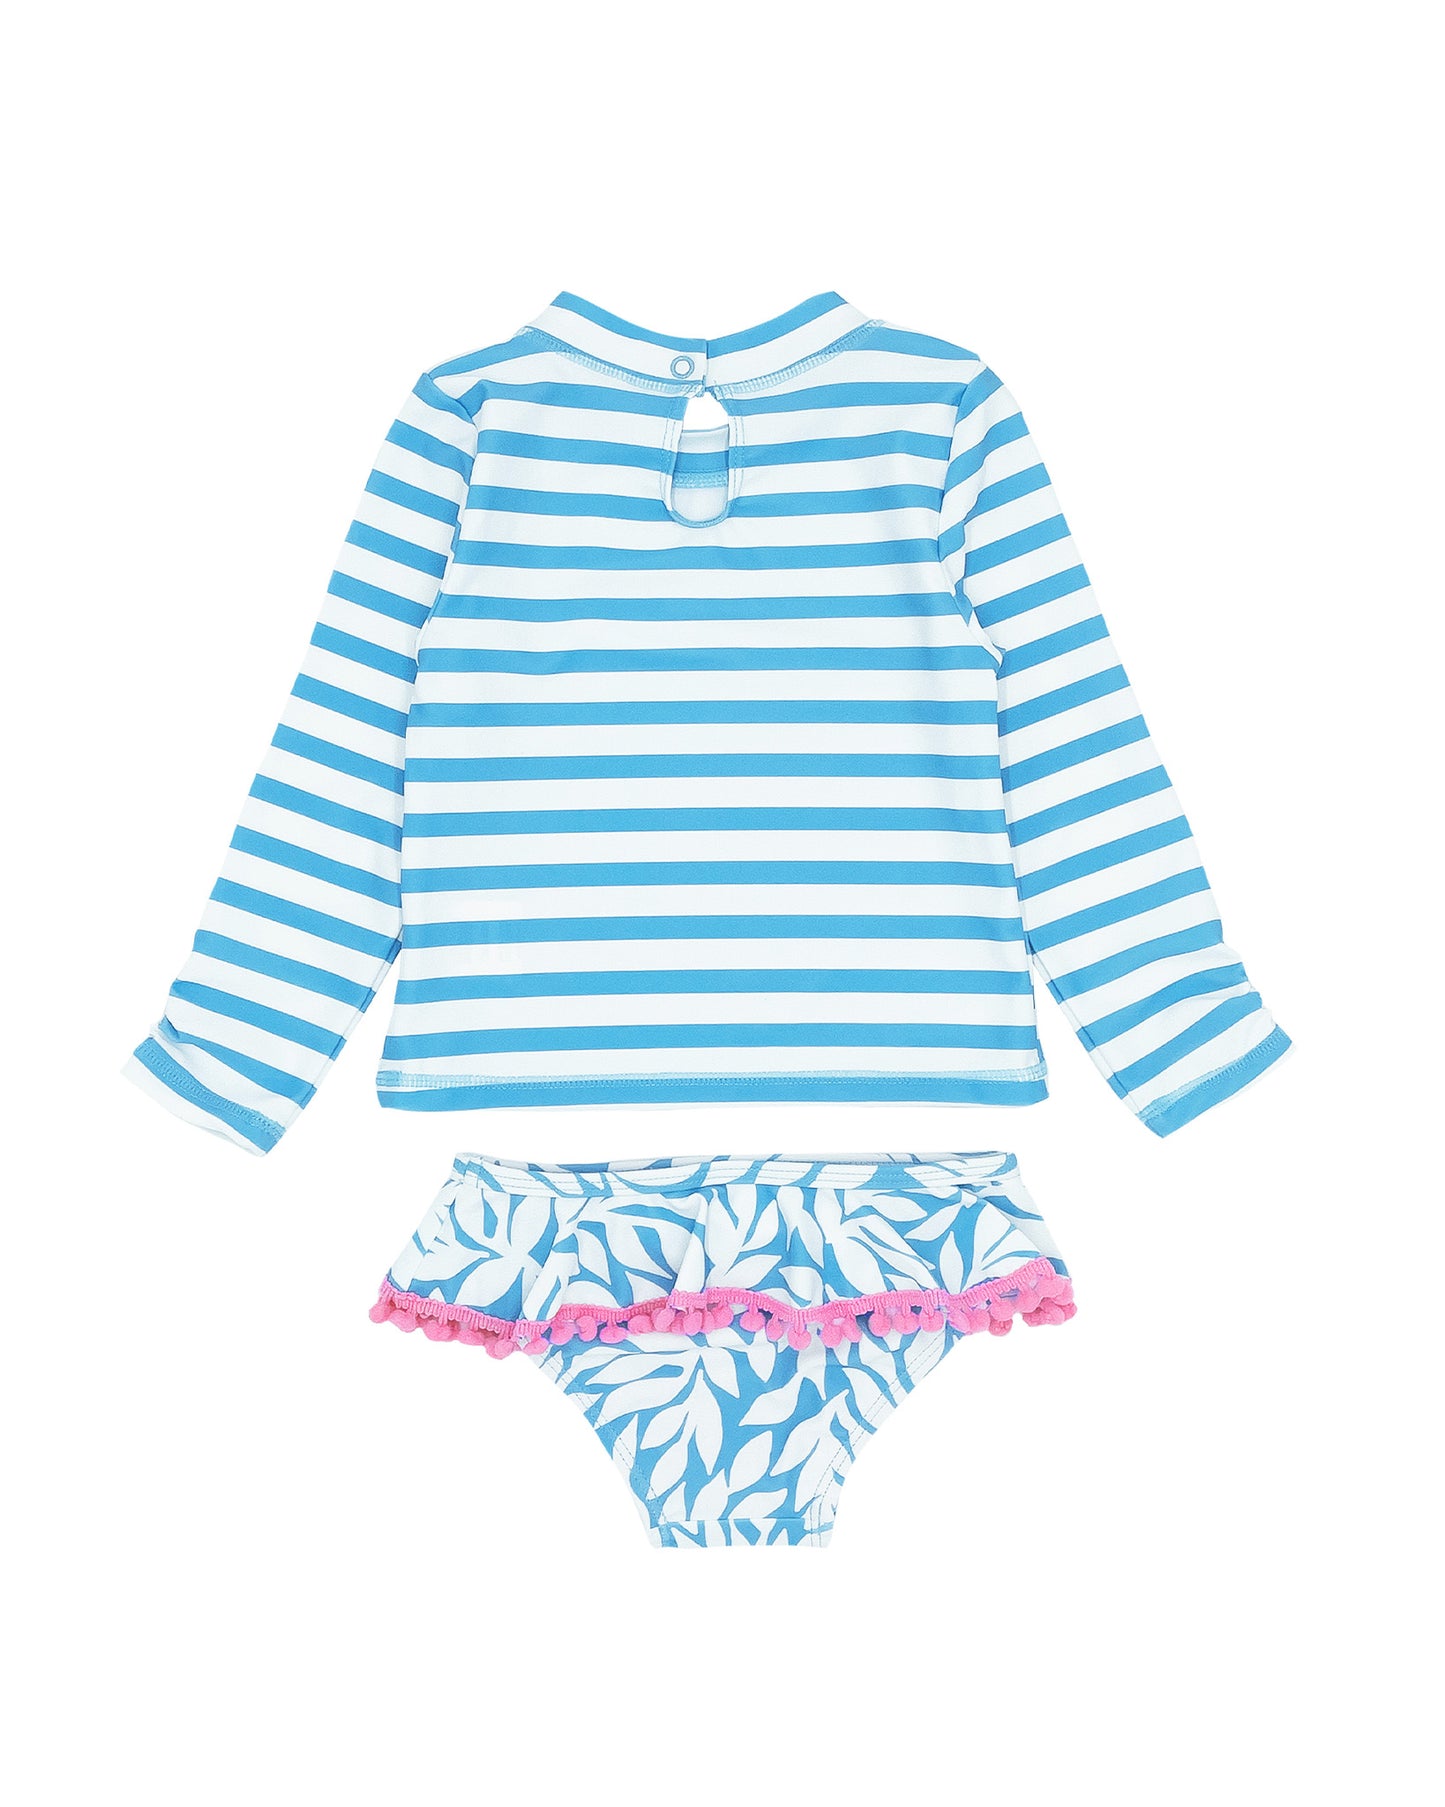 Sandy Toes Baby Two-Piece Swimsuit